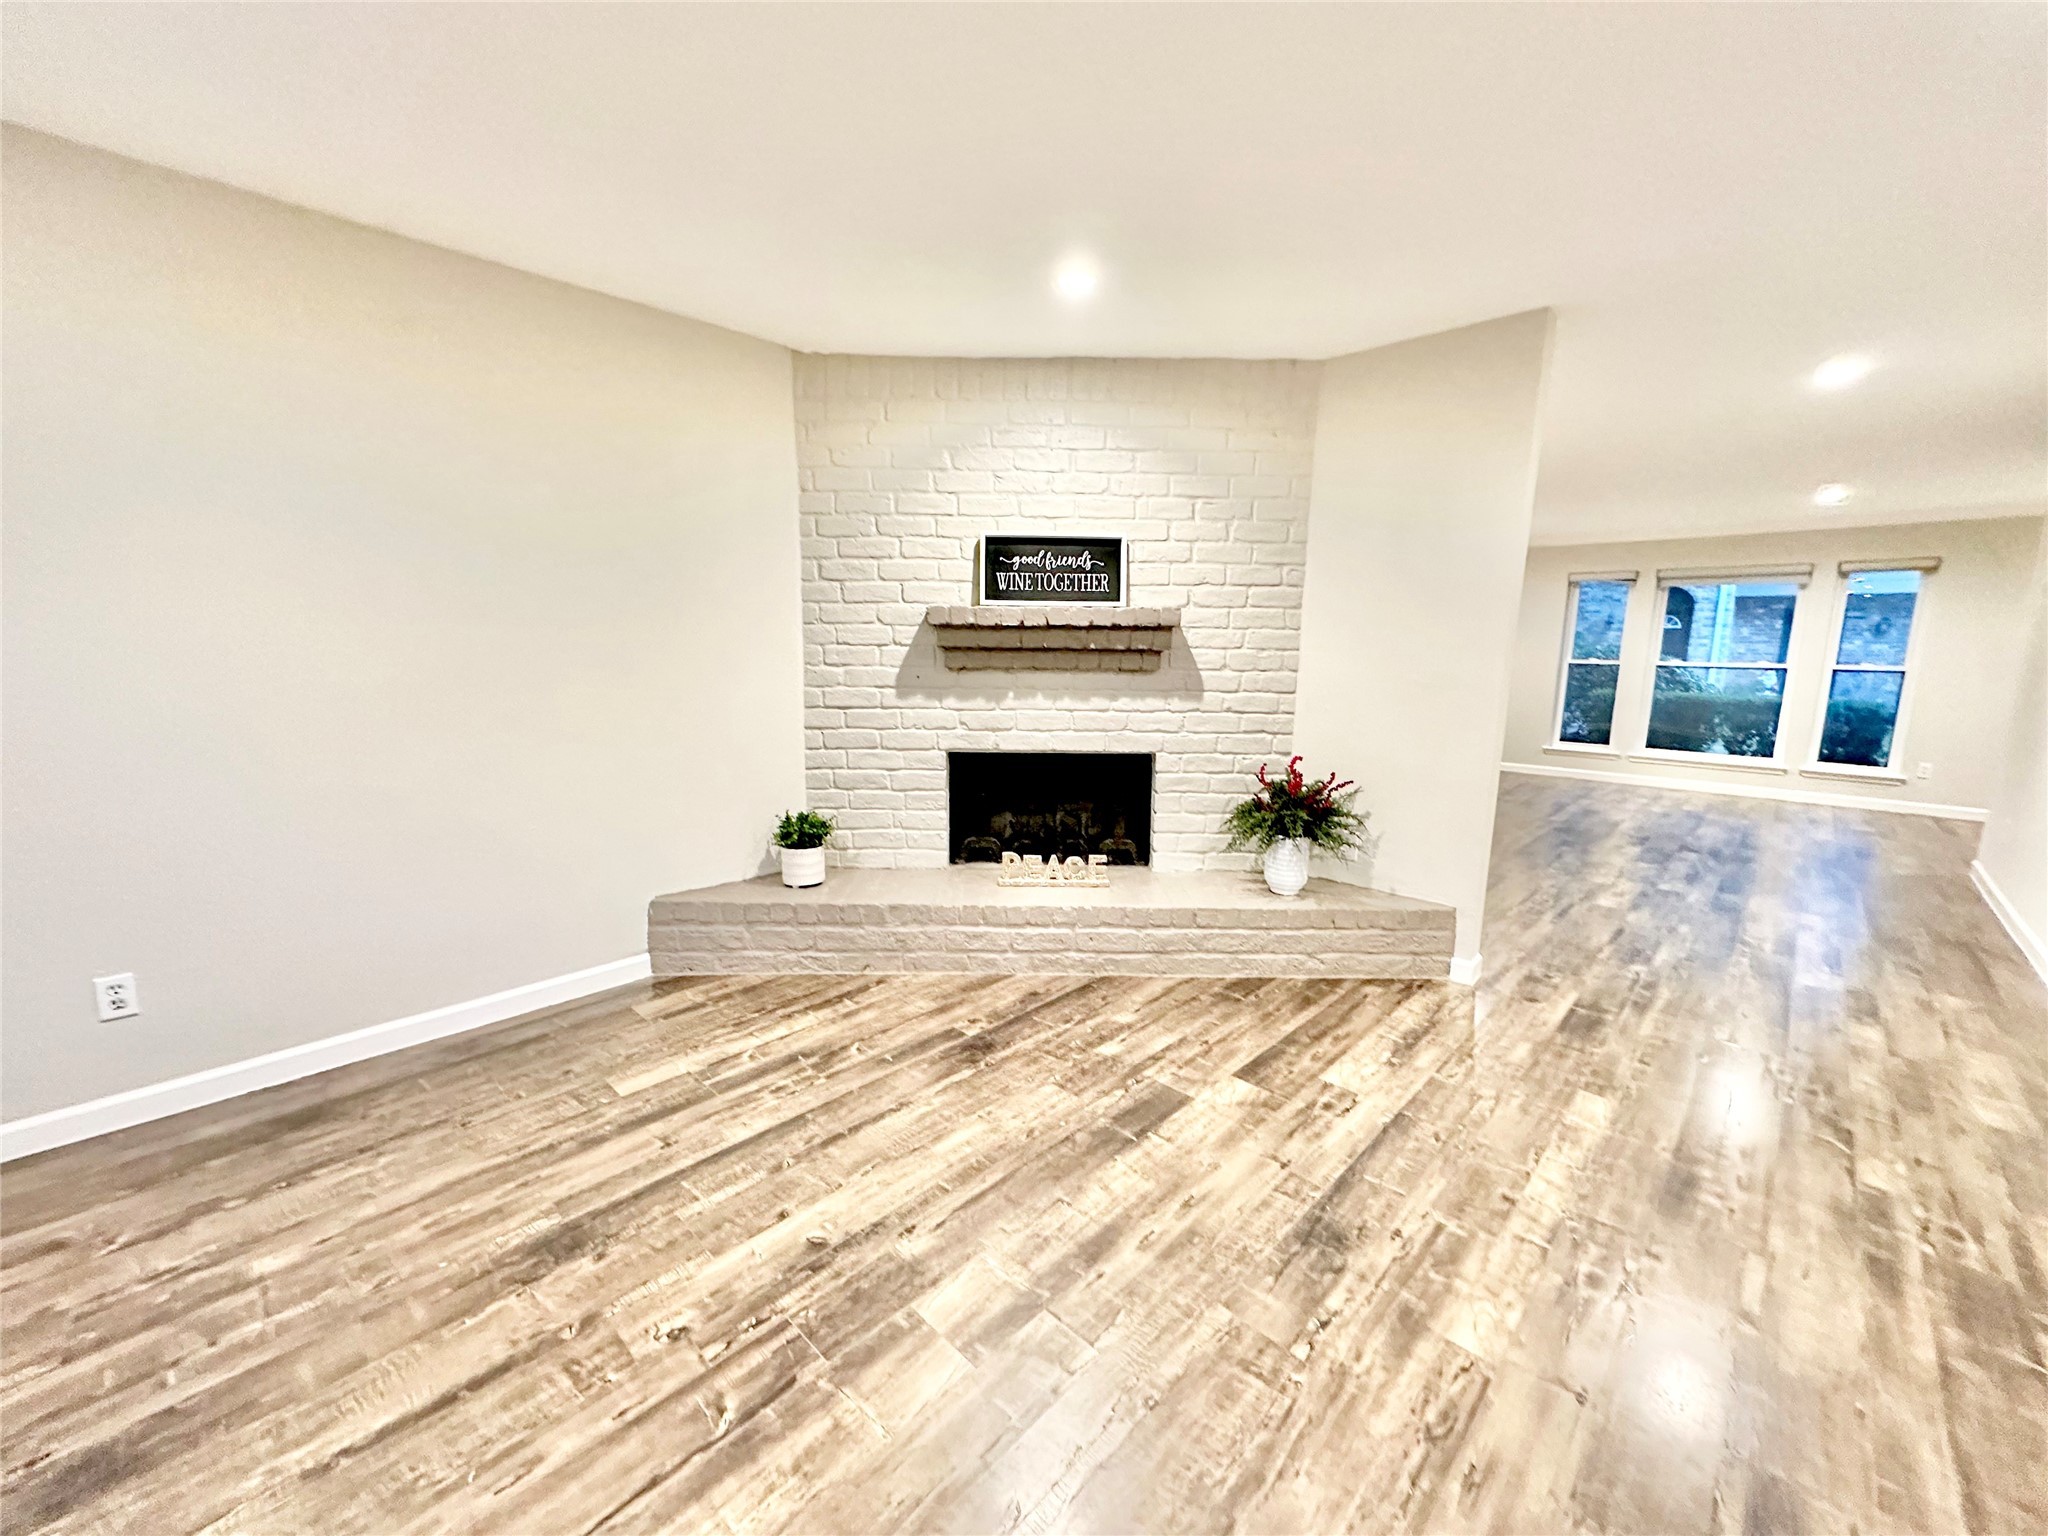 Wide laminate floor paths and unobstructed space from family room to dining and living room area over looking recently updated double pane windows with blackout roller shades.